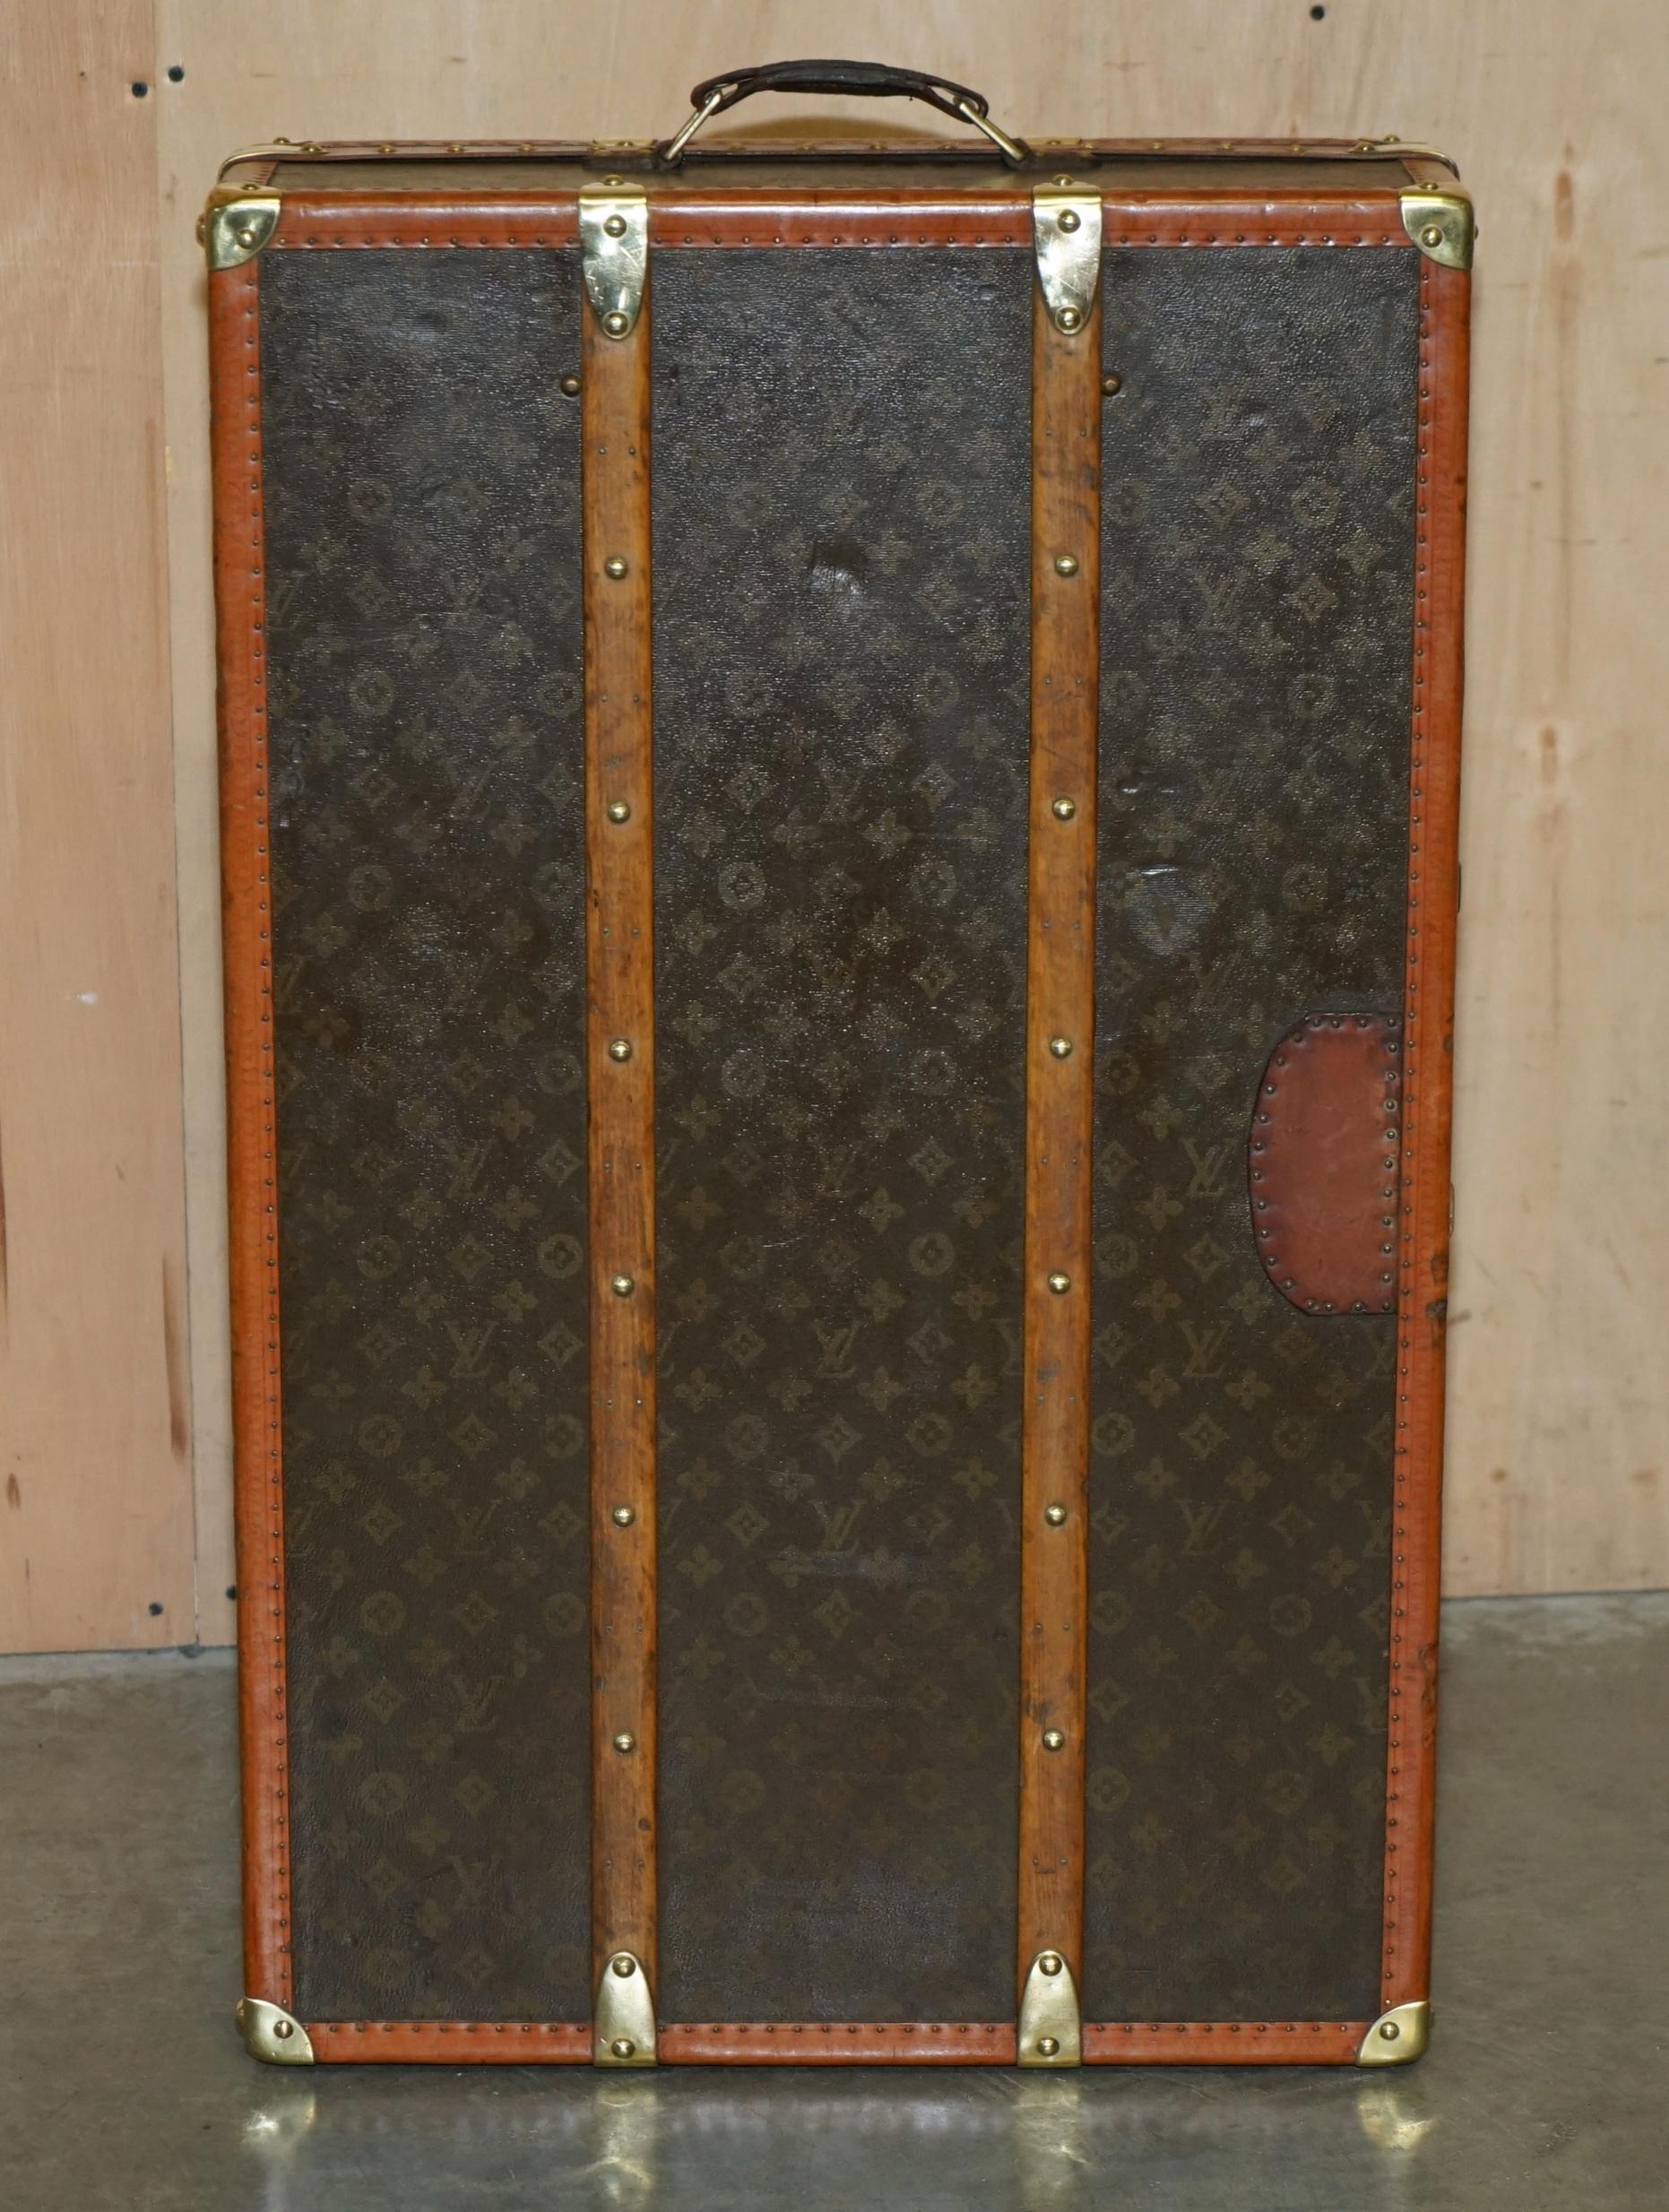 FULLY RESTORED ANTiQUE LOUIS VUITTON STAMPED MONOGRAM WARDROBE TRUNK For Sale 1